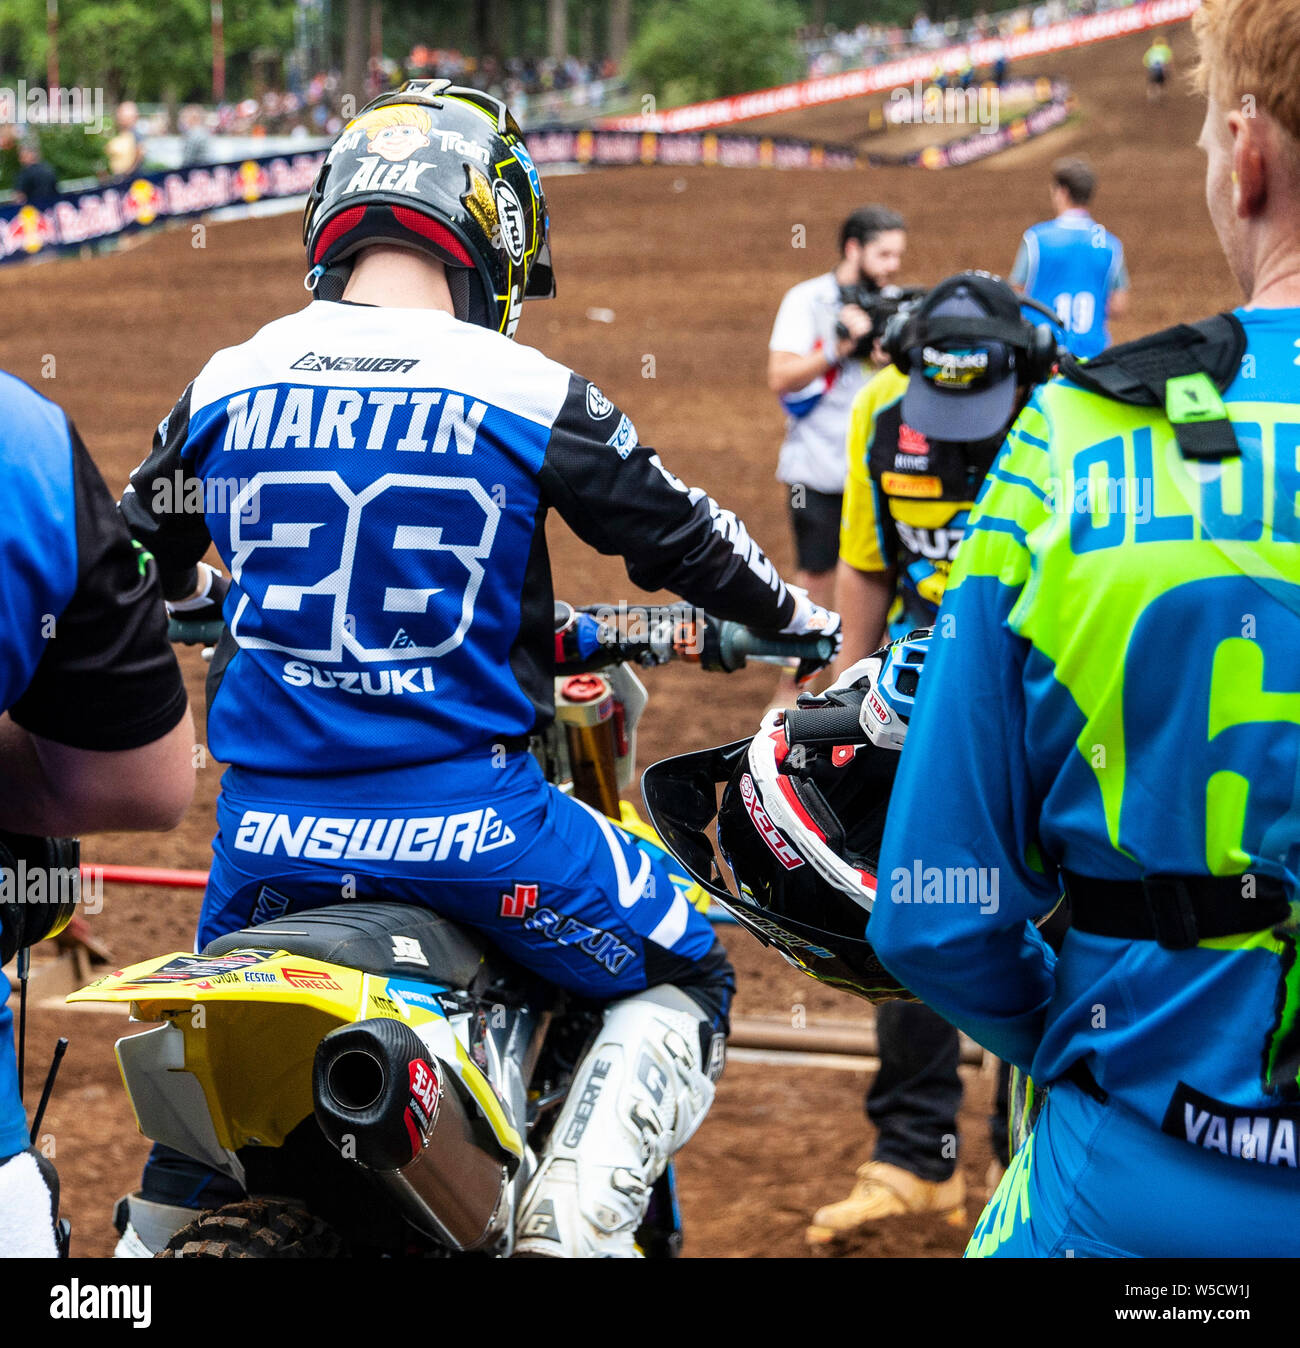 Washougal, USA. 27th July, 2019. # 26 Alex Martin waiting at the starting  line during the Lucas Oil Pro Motocross Washougal Championship 250 class  moto # 1 at Washougal MX park Washougal,